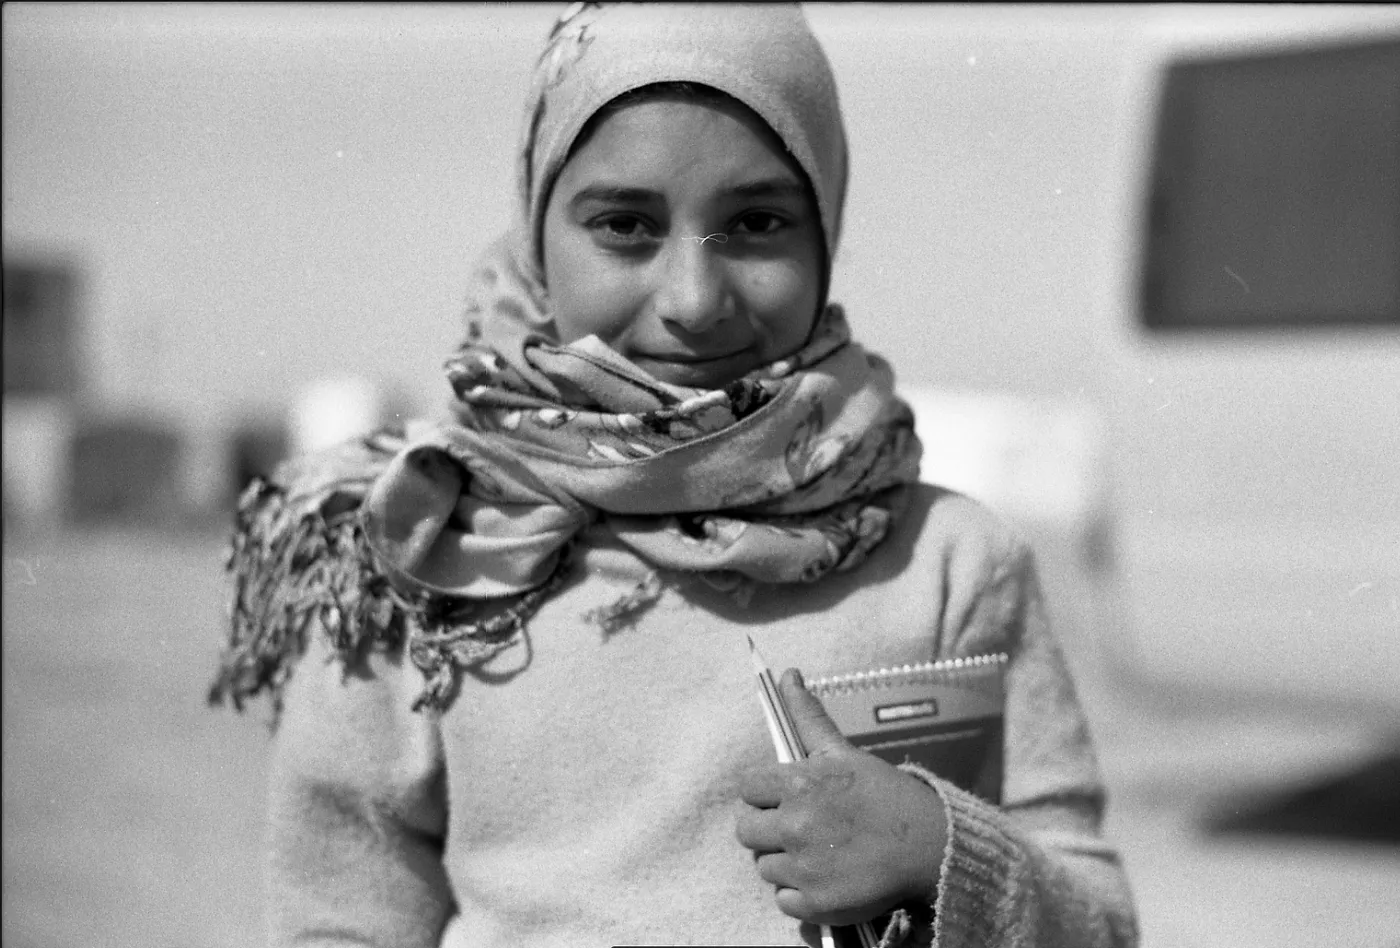 A young girl in a hijab smiles at the camera. She is holding a notebook and pencil.